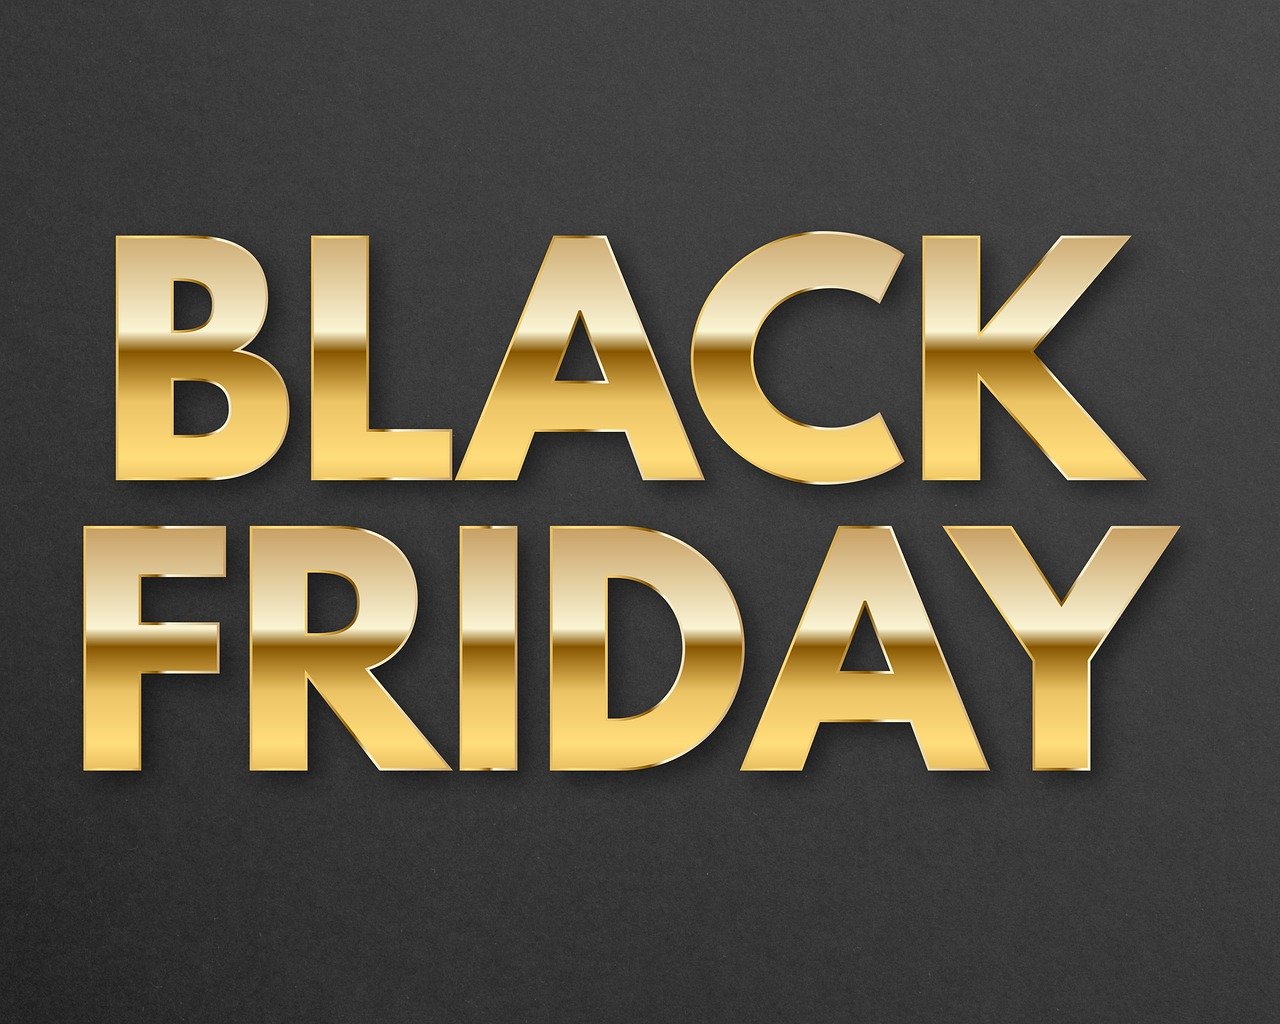 black friday letters in gold and black background